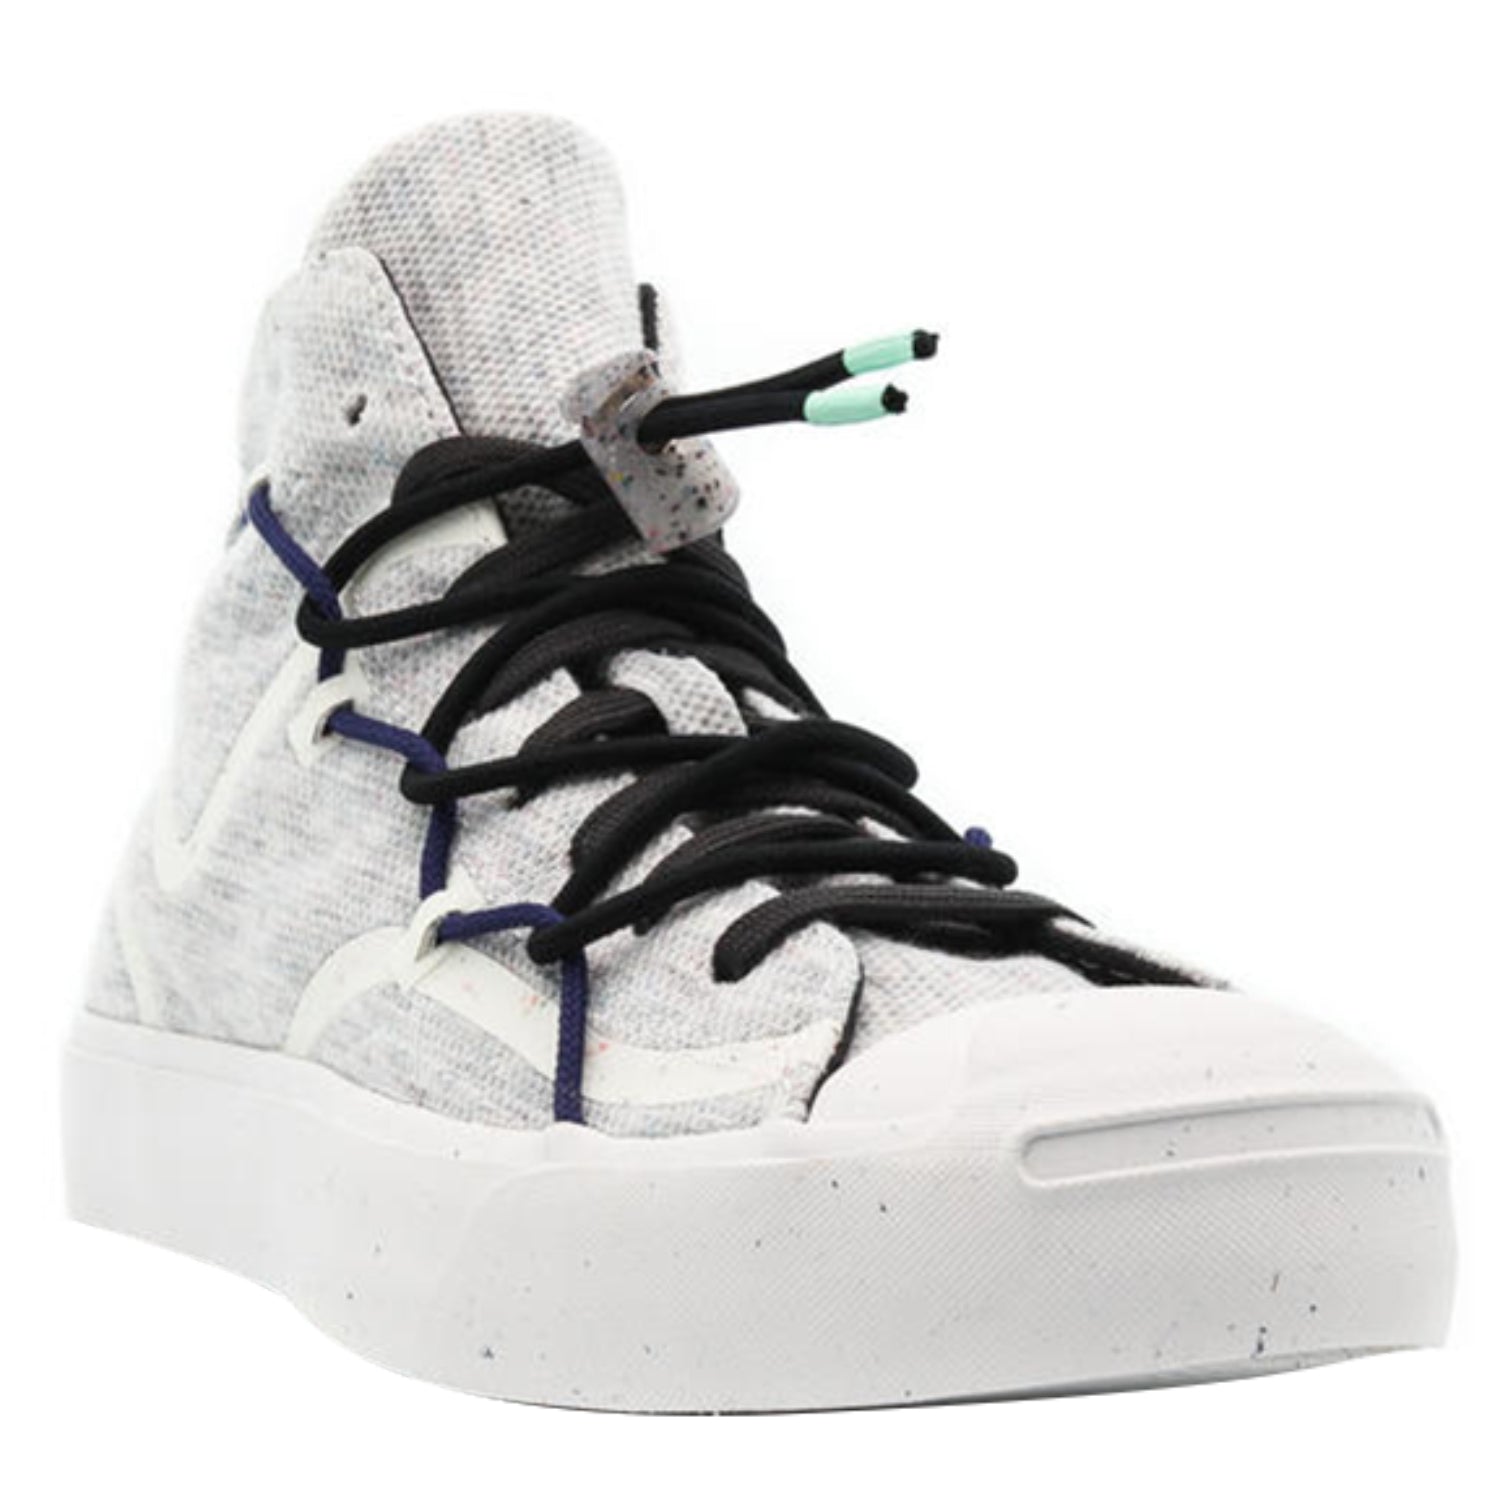 Converse Jack Purcell Rally Mid Unisex Style : 170947c